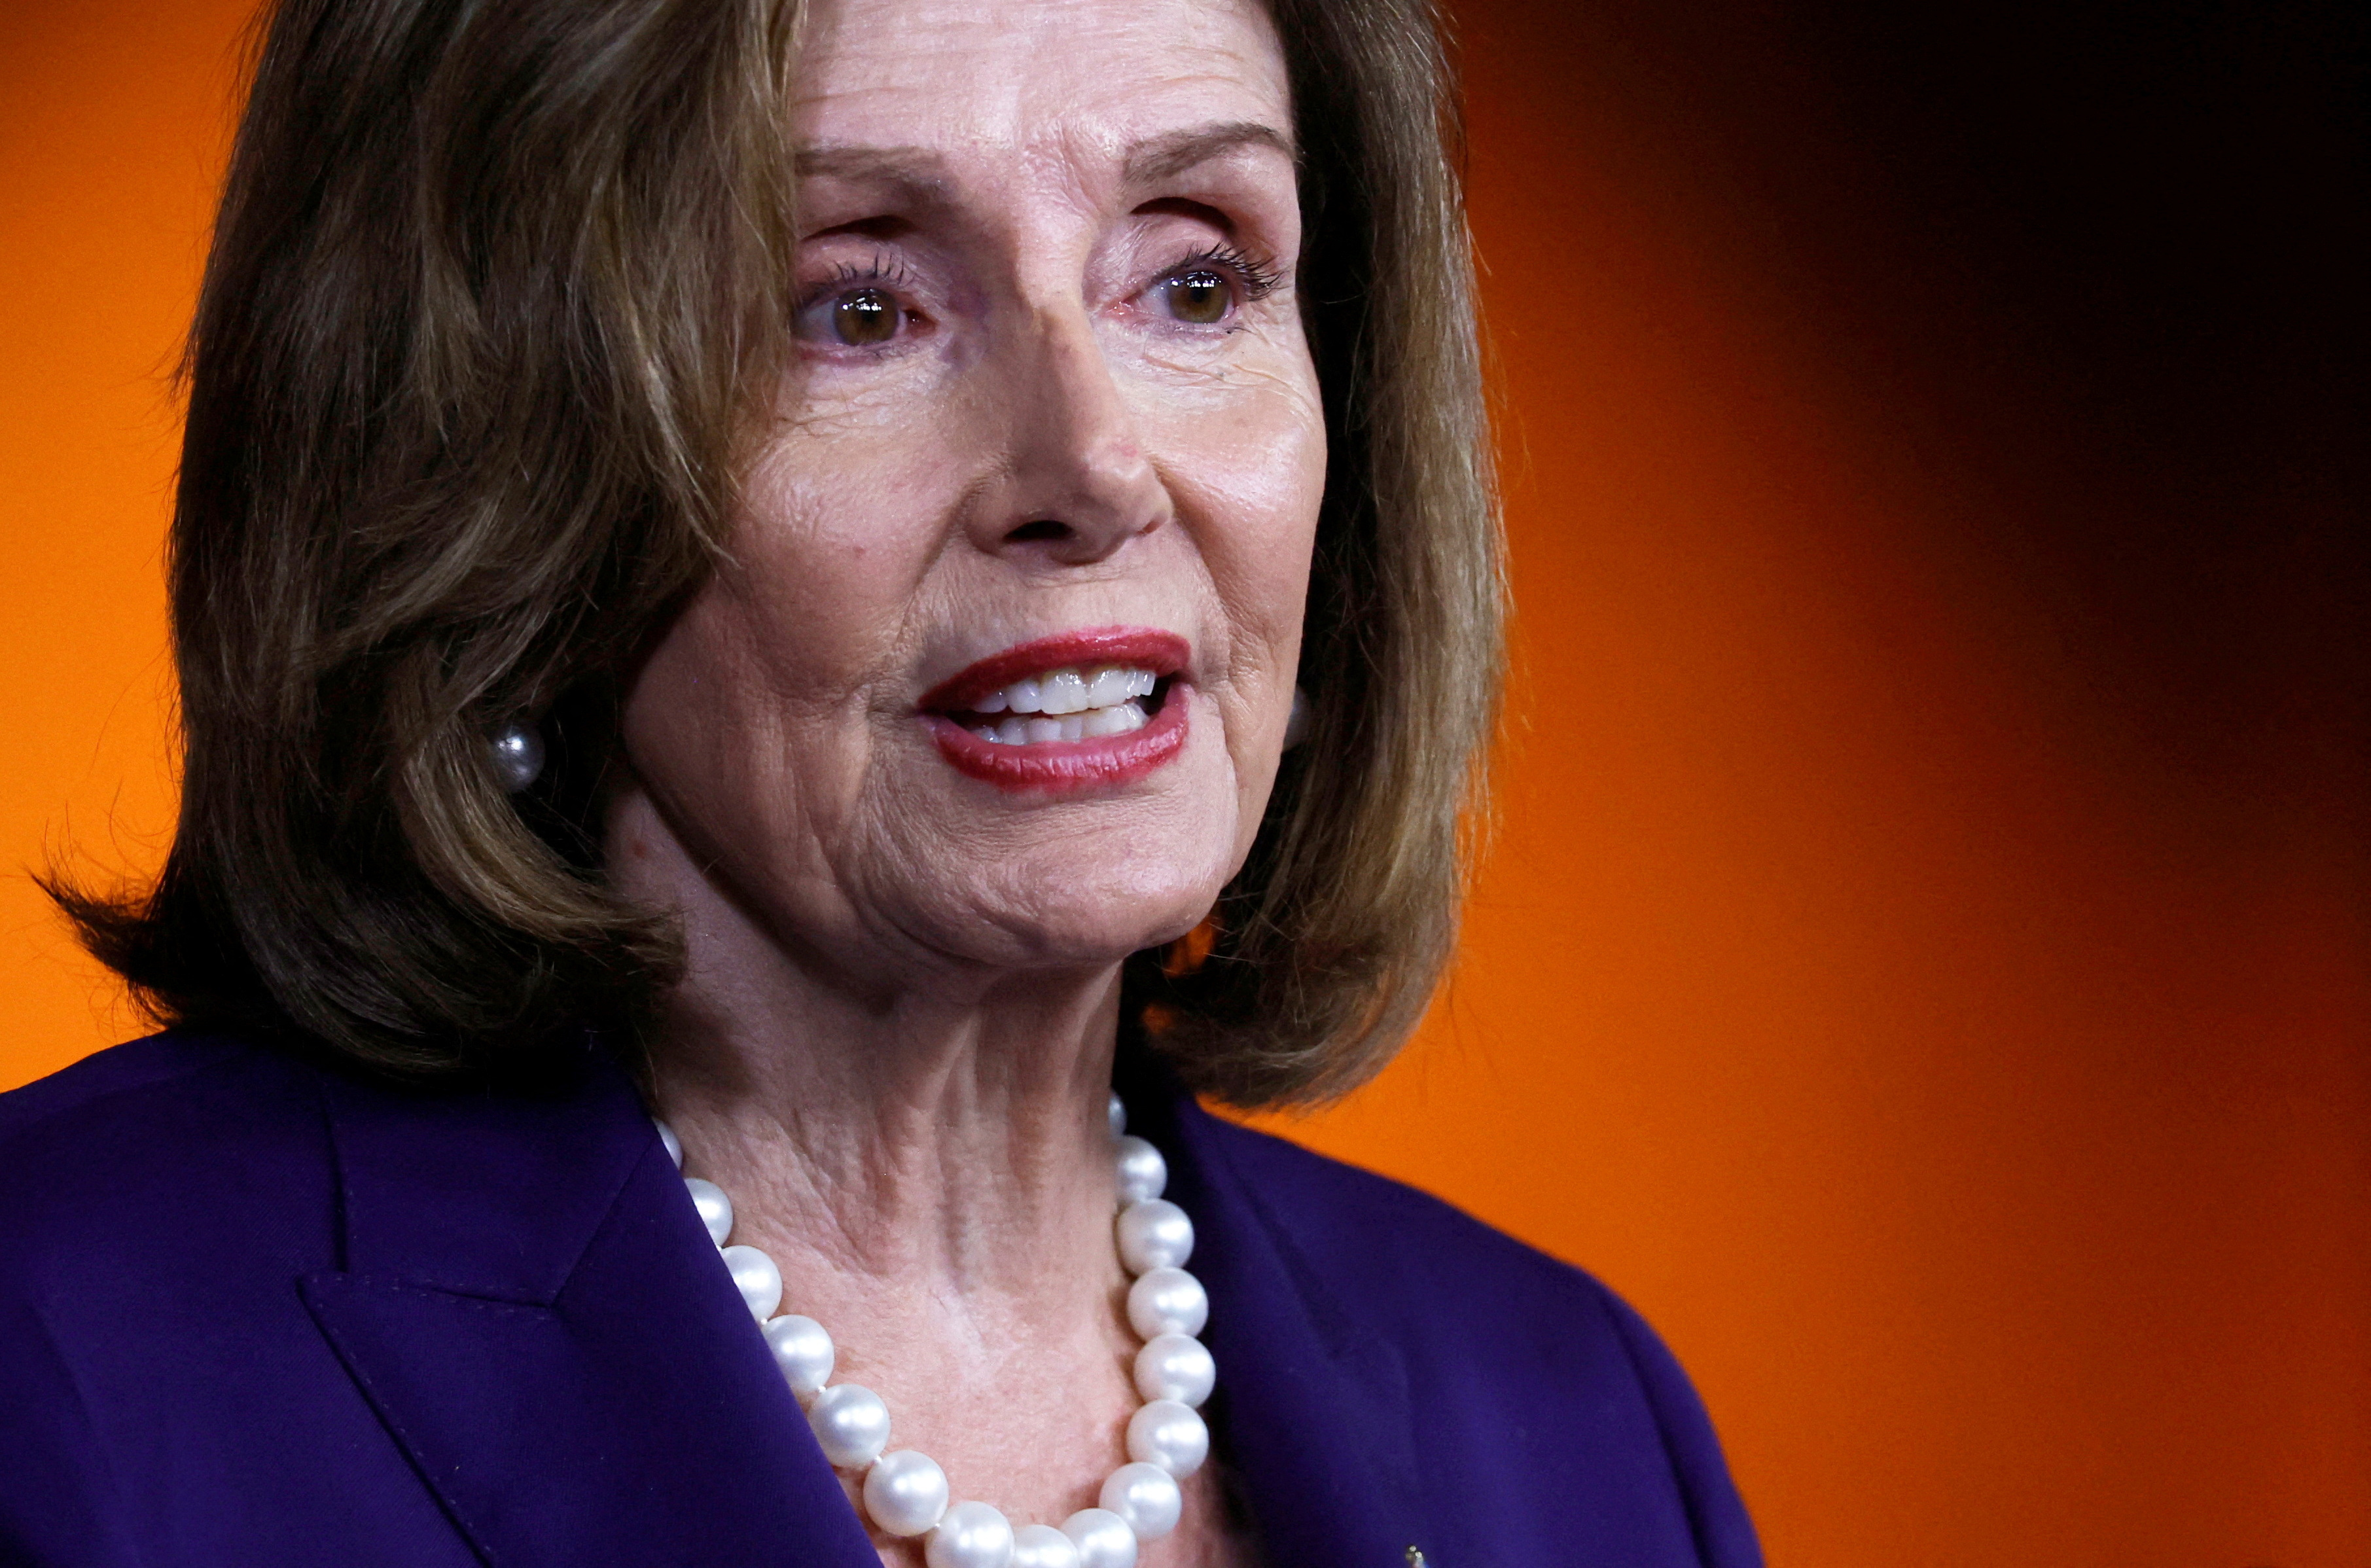 U.S. House Speaker Nancy Pelosi holds news conference on Capitol Hill in Washington